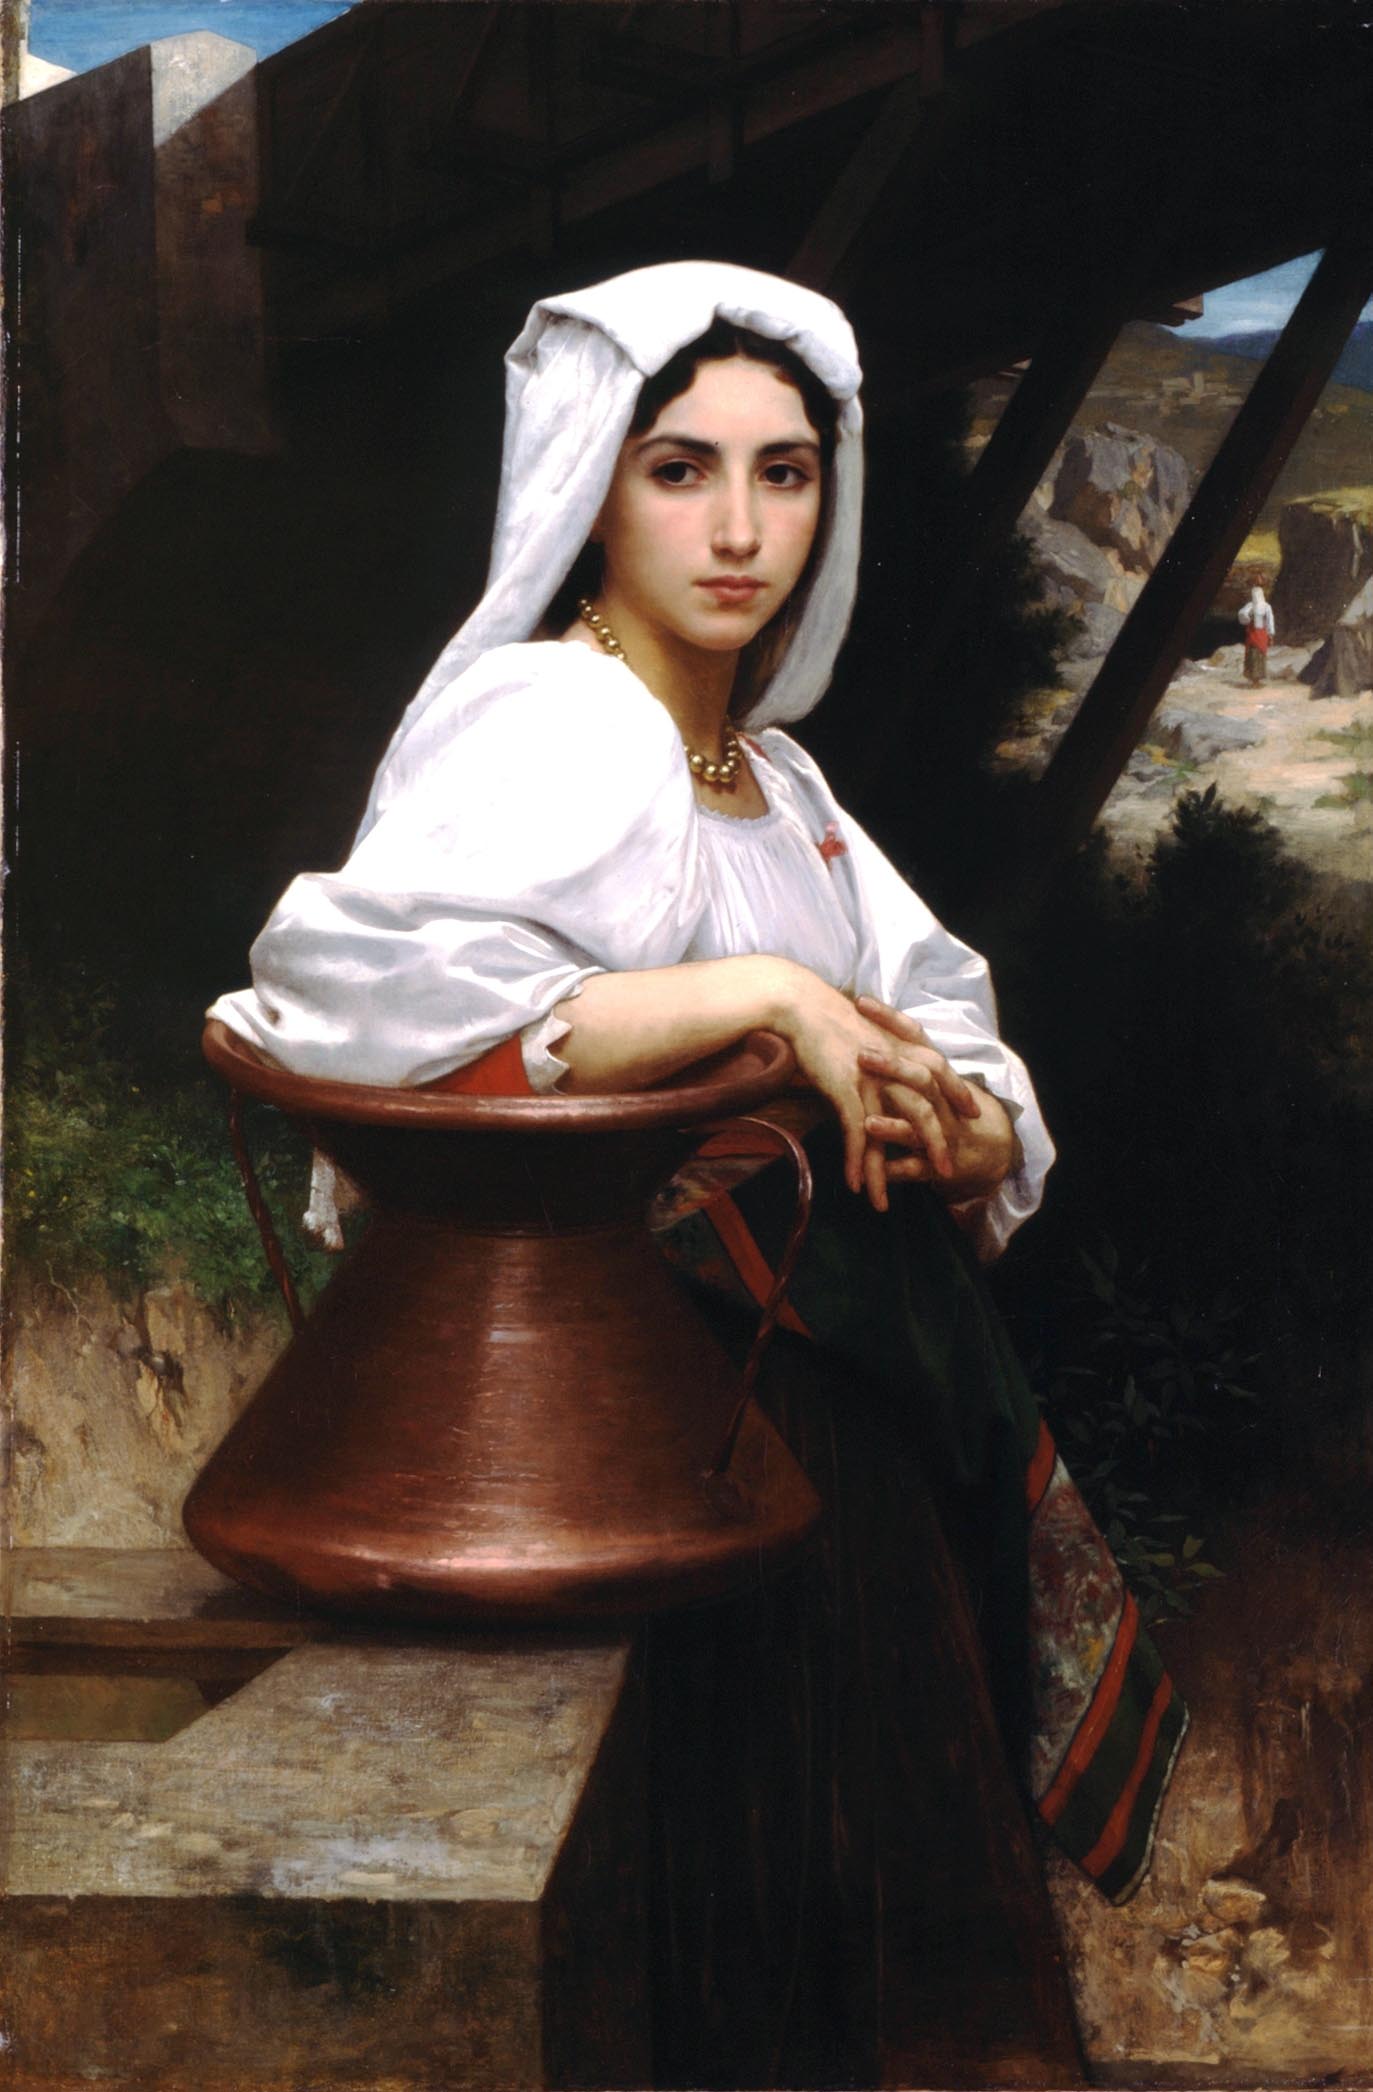 Italian Girl Drawing Water by William-Adolphe Bouguereau - 1871 - 79 x 119.5 cm private collection